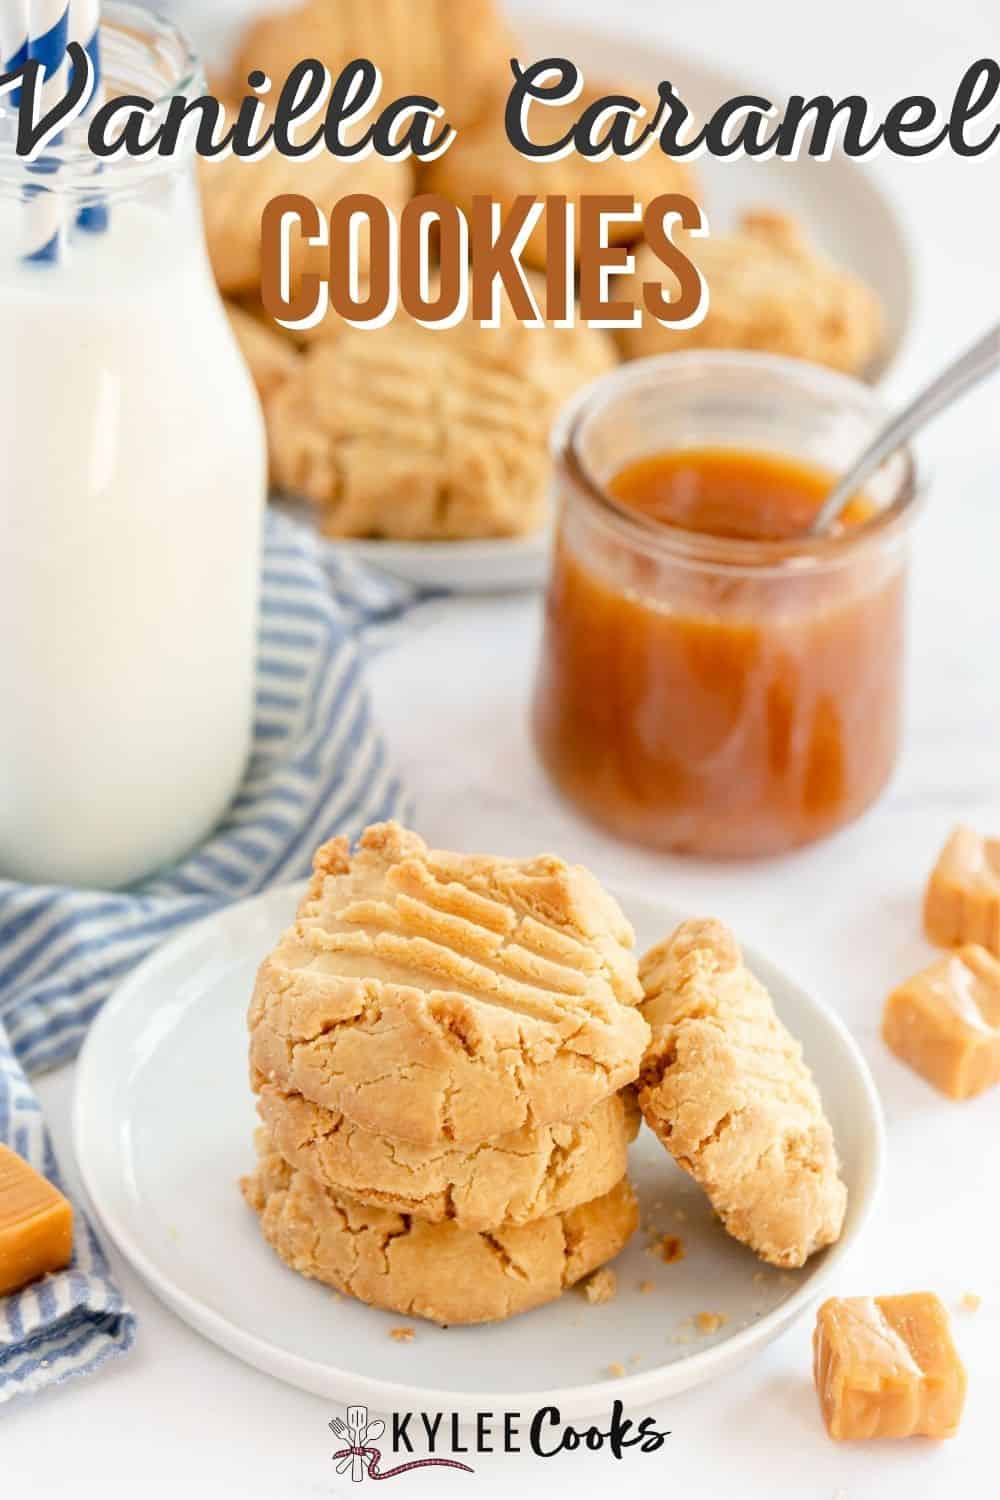 caramel cookies on a white plate with a bottle of milk with recipe title in text overlay